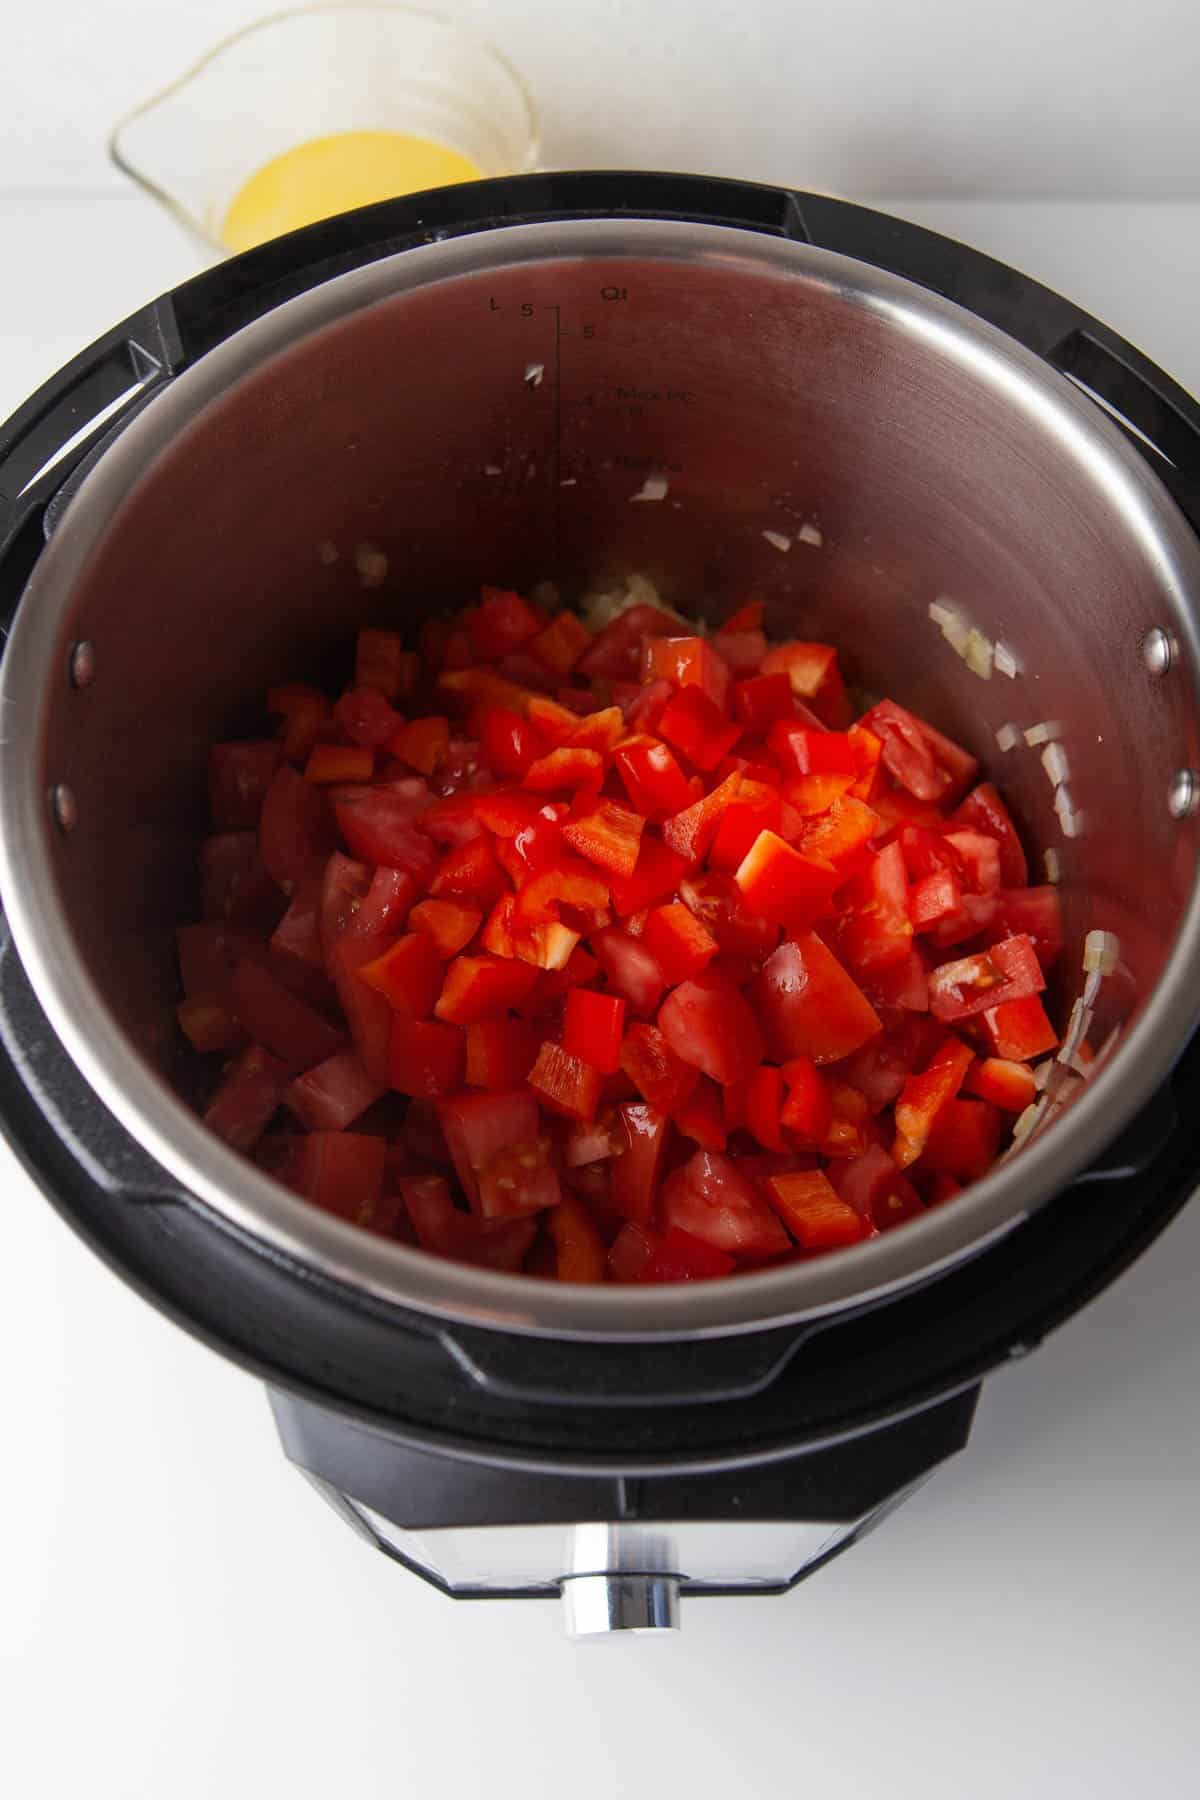 Diced tomatoes in an Instant Pot for making tomato soup.